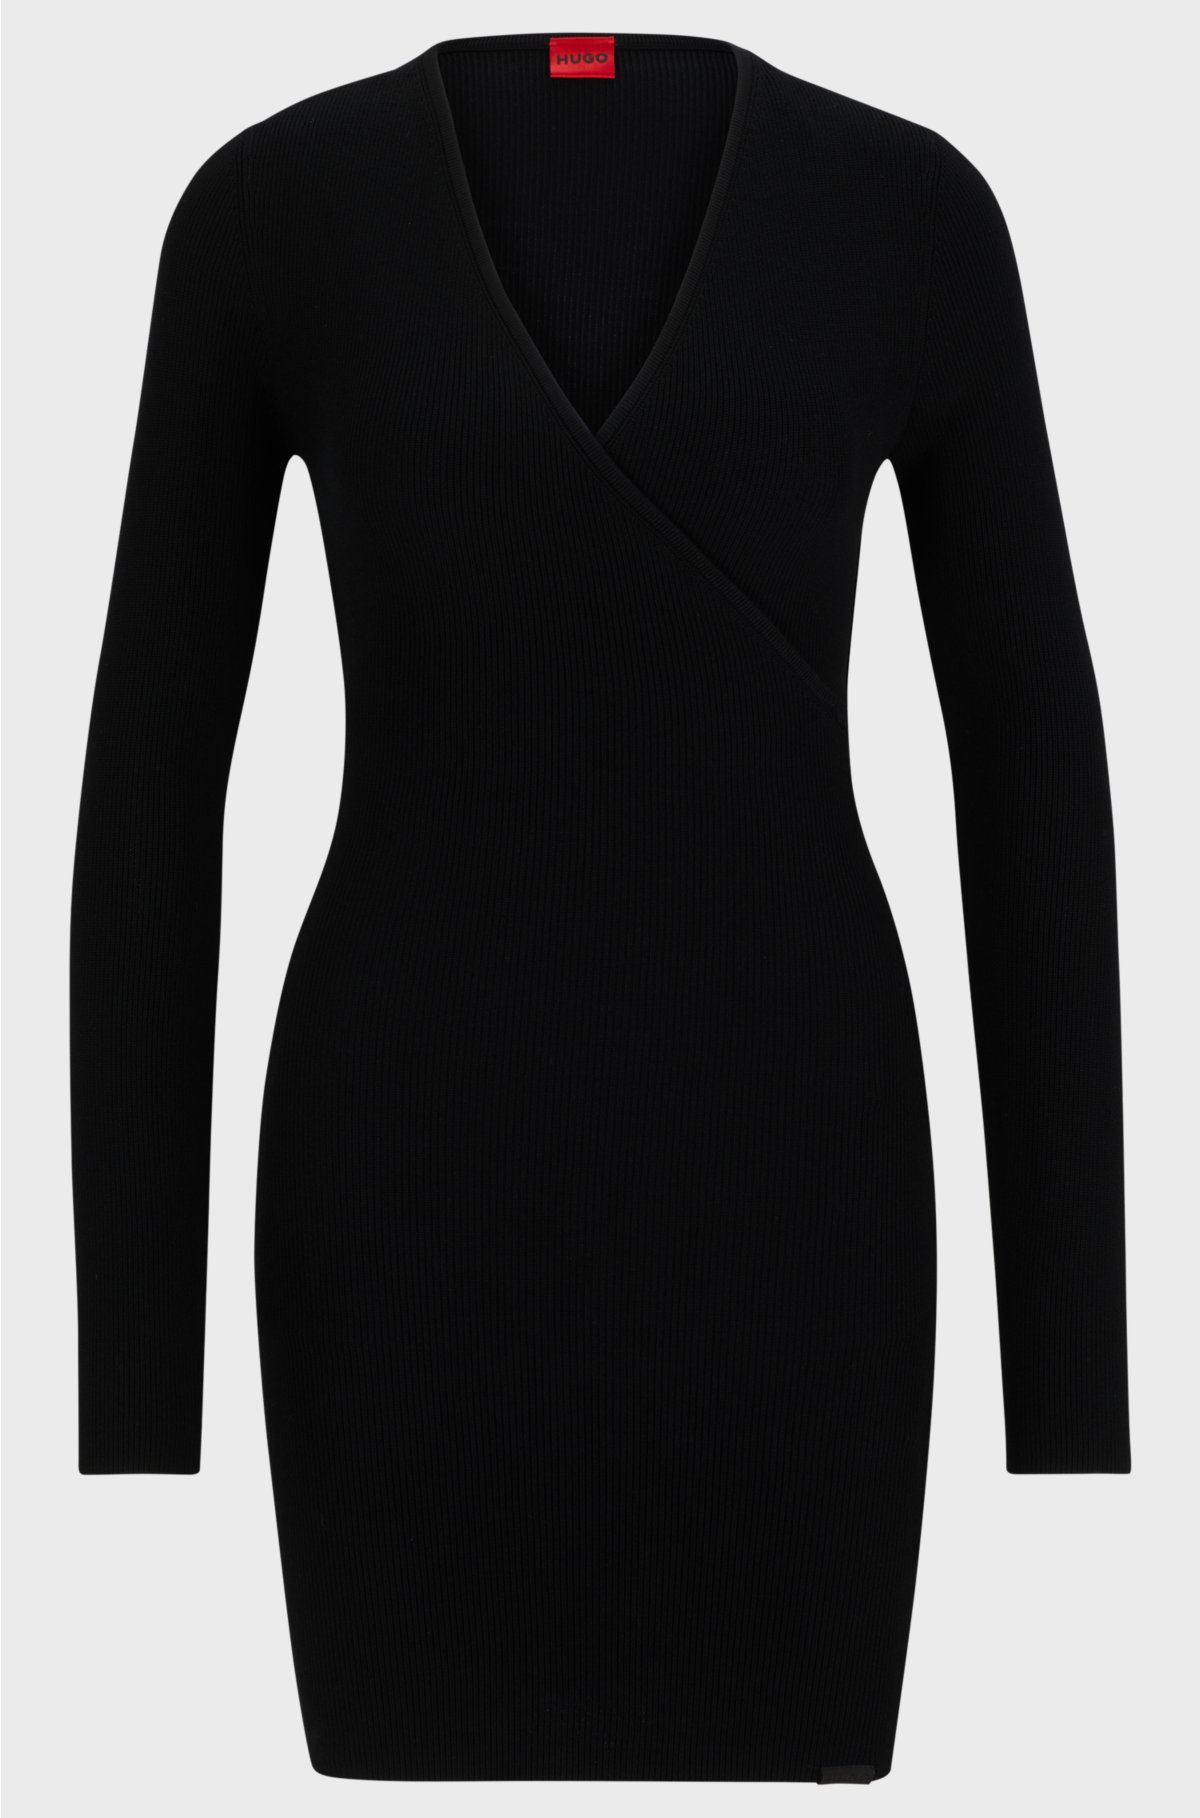 Wrap-effect crepe dress with cut-out detail, Black